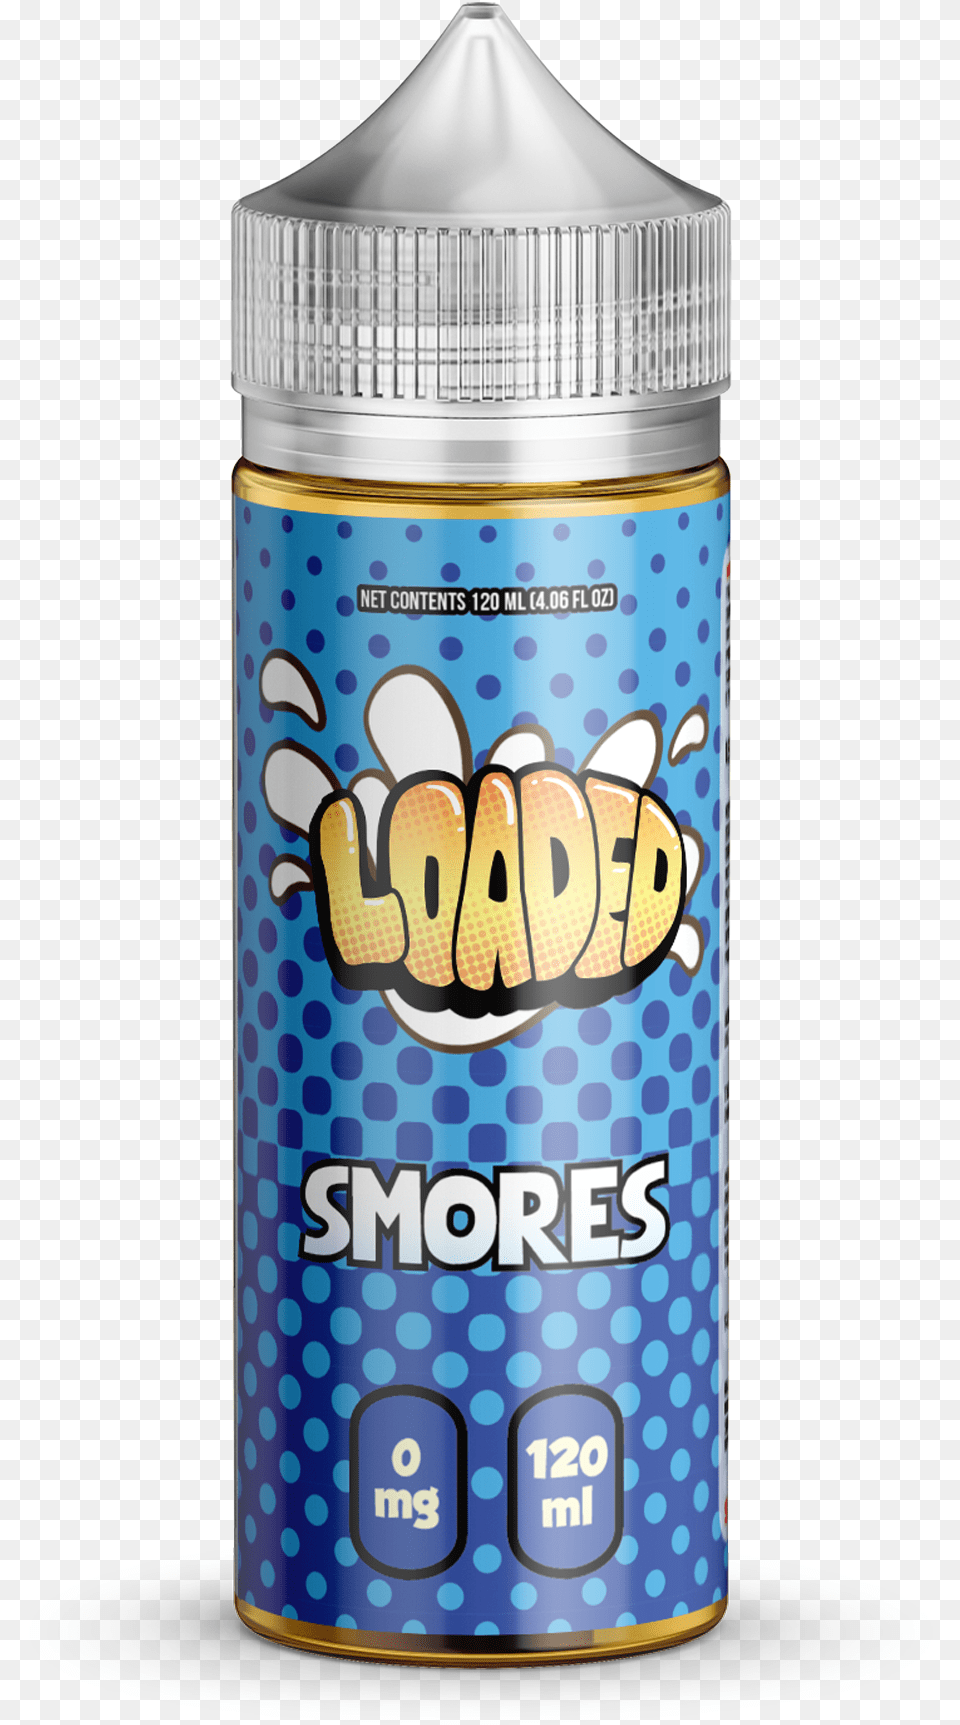 Smores Loaded 120ml Next Big Thing E Liquid, Bottle, Can, Tin Free Png Download